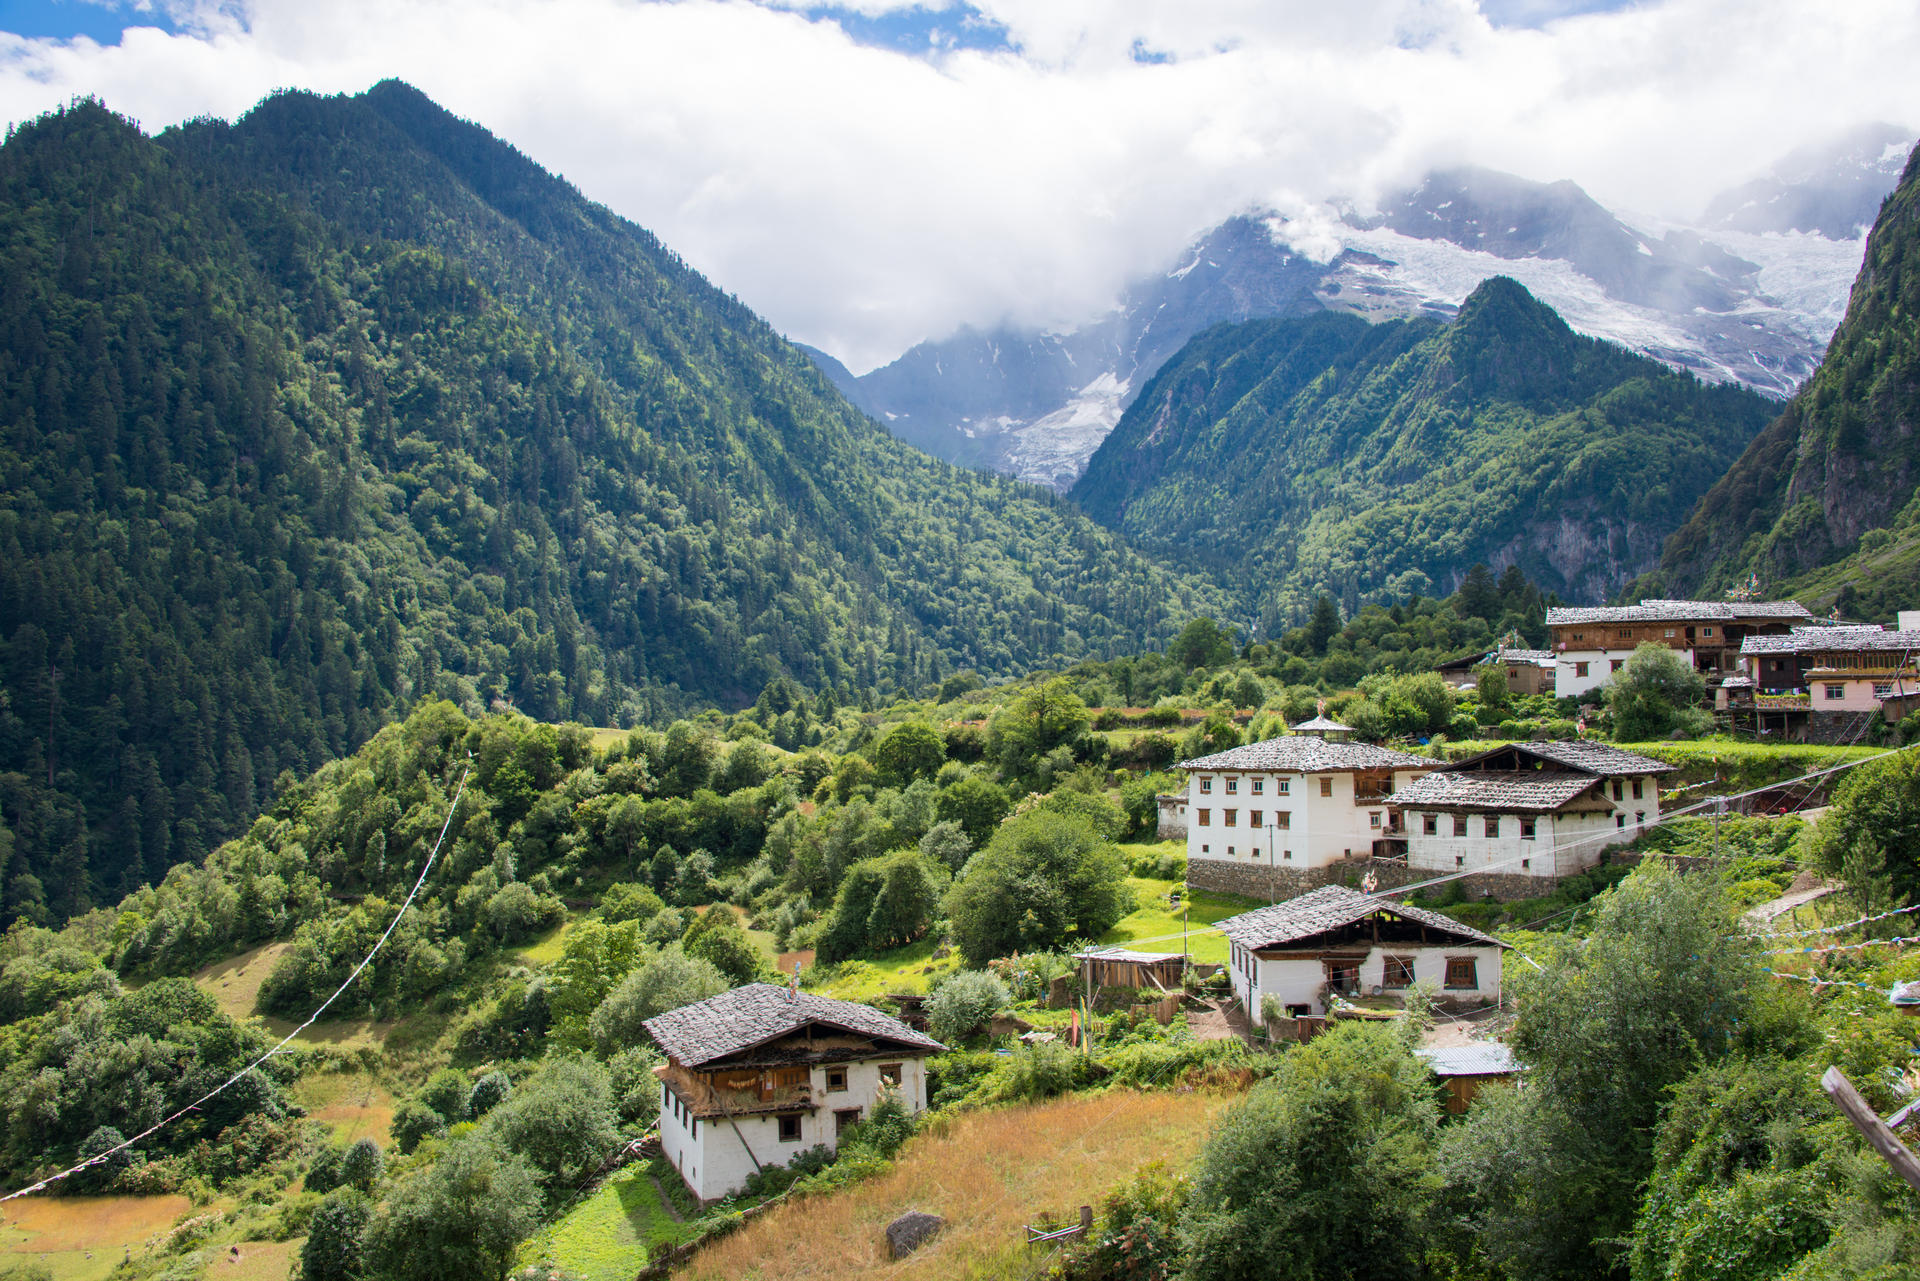 Yubeng Village in Deqin, Yunnan, the area in which Moët Hennessy is attempting to produce a top-class red.